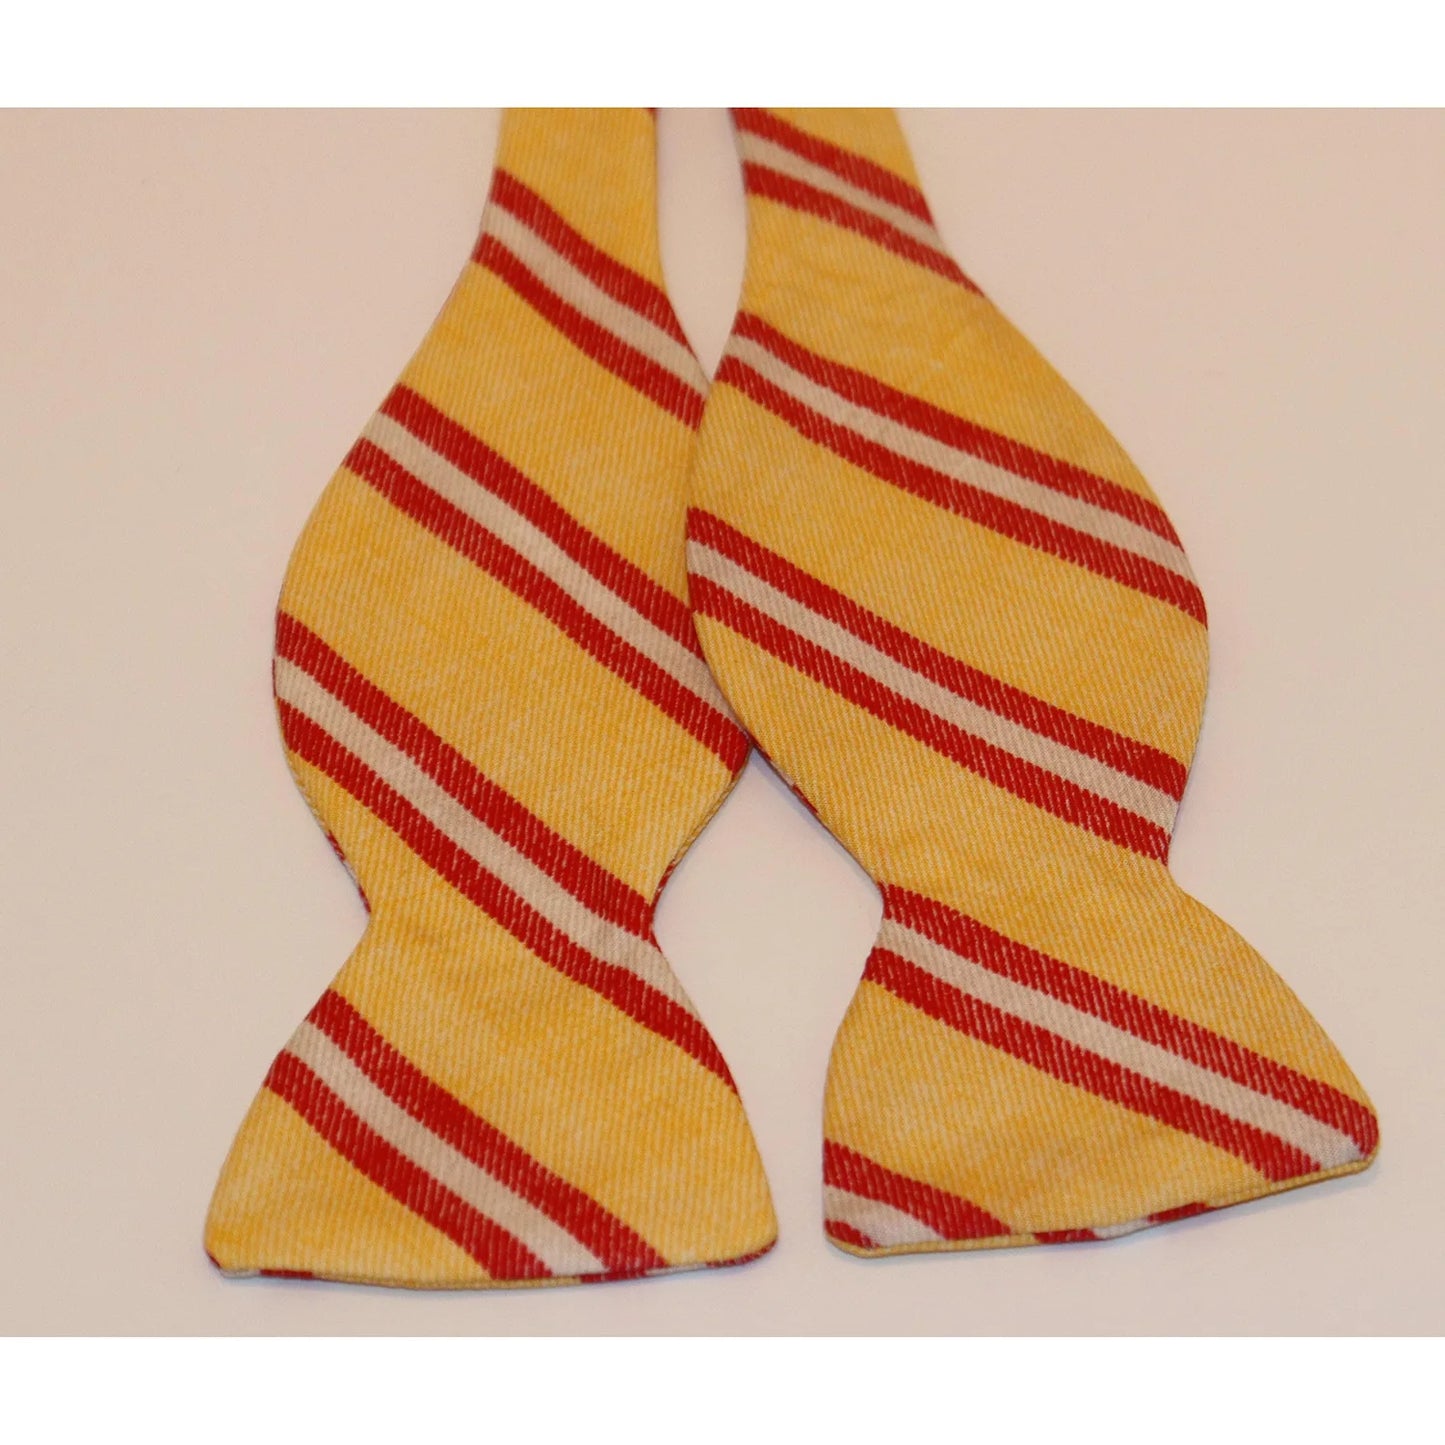 R. Hanauer Bow Tie - Yellow with Red/White Stripe